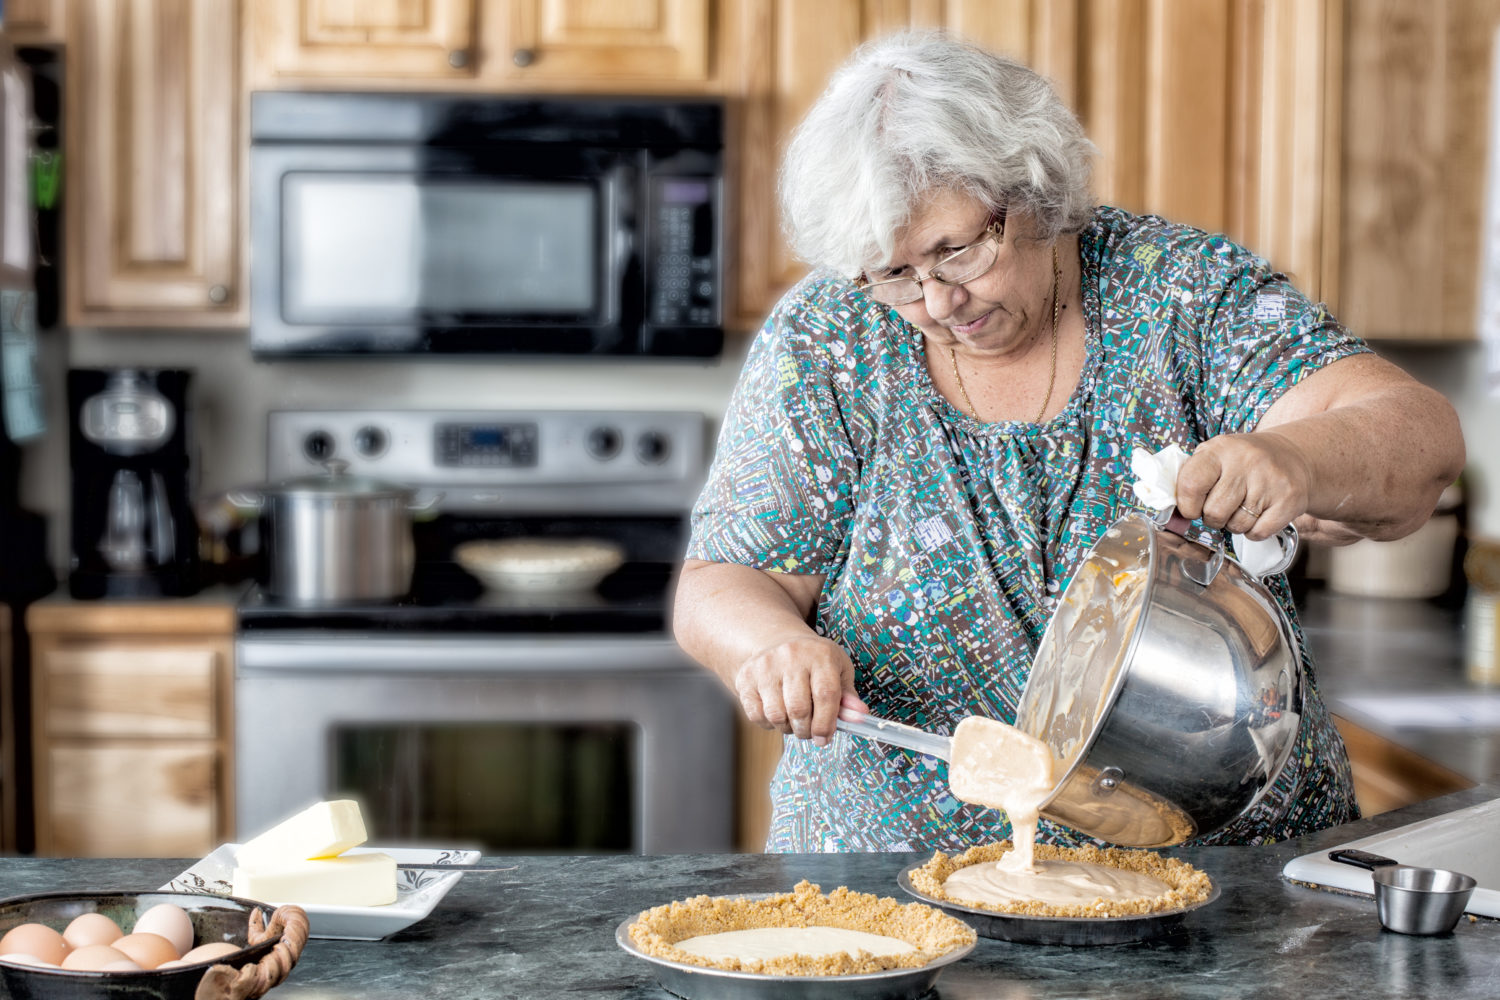 Photo of a grandmother elderly active woman in a natural kitchen filling pies. White older woman in the kitchen baking.